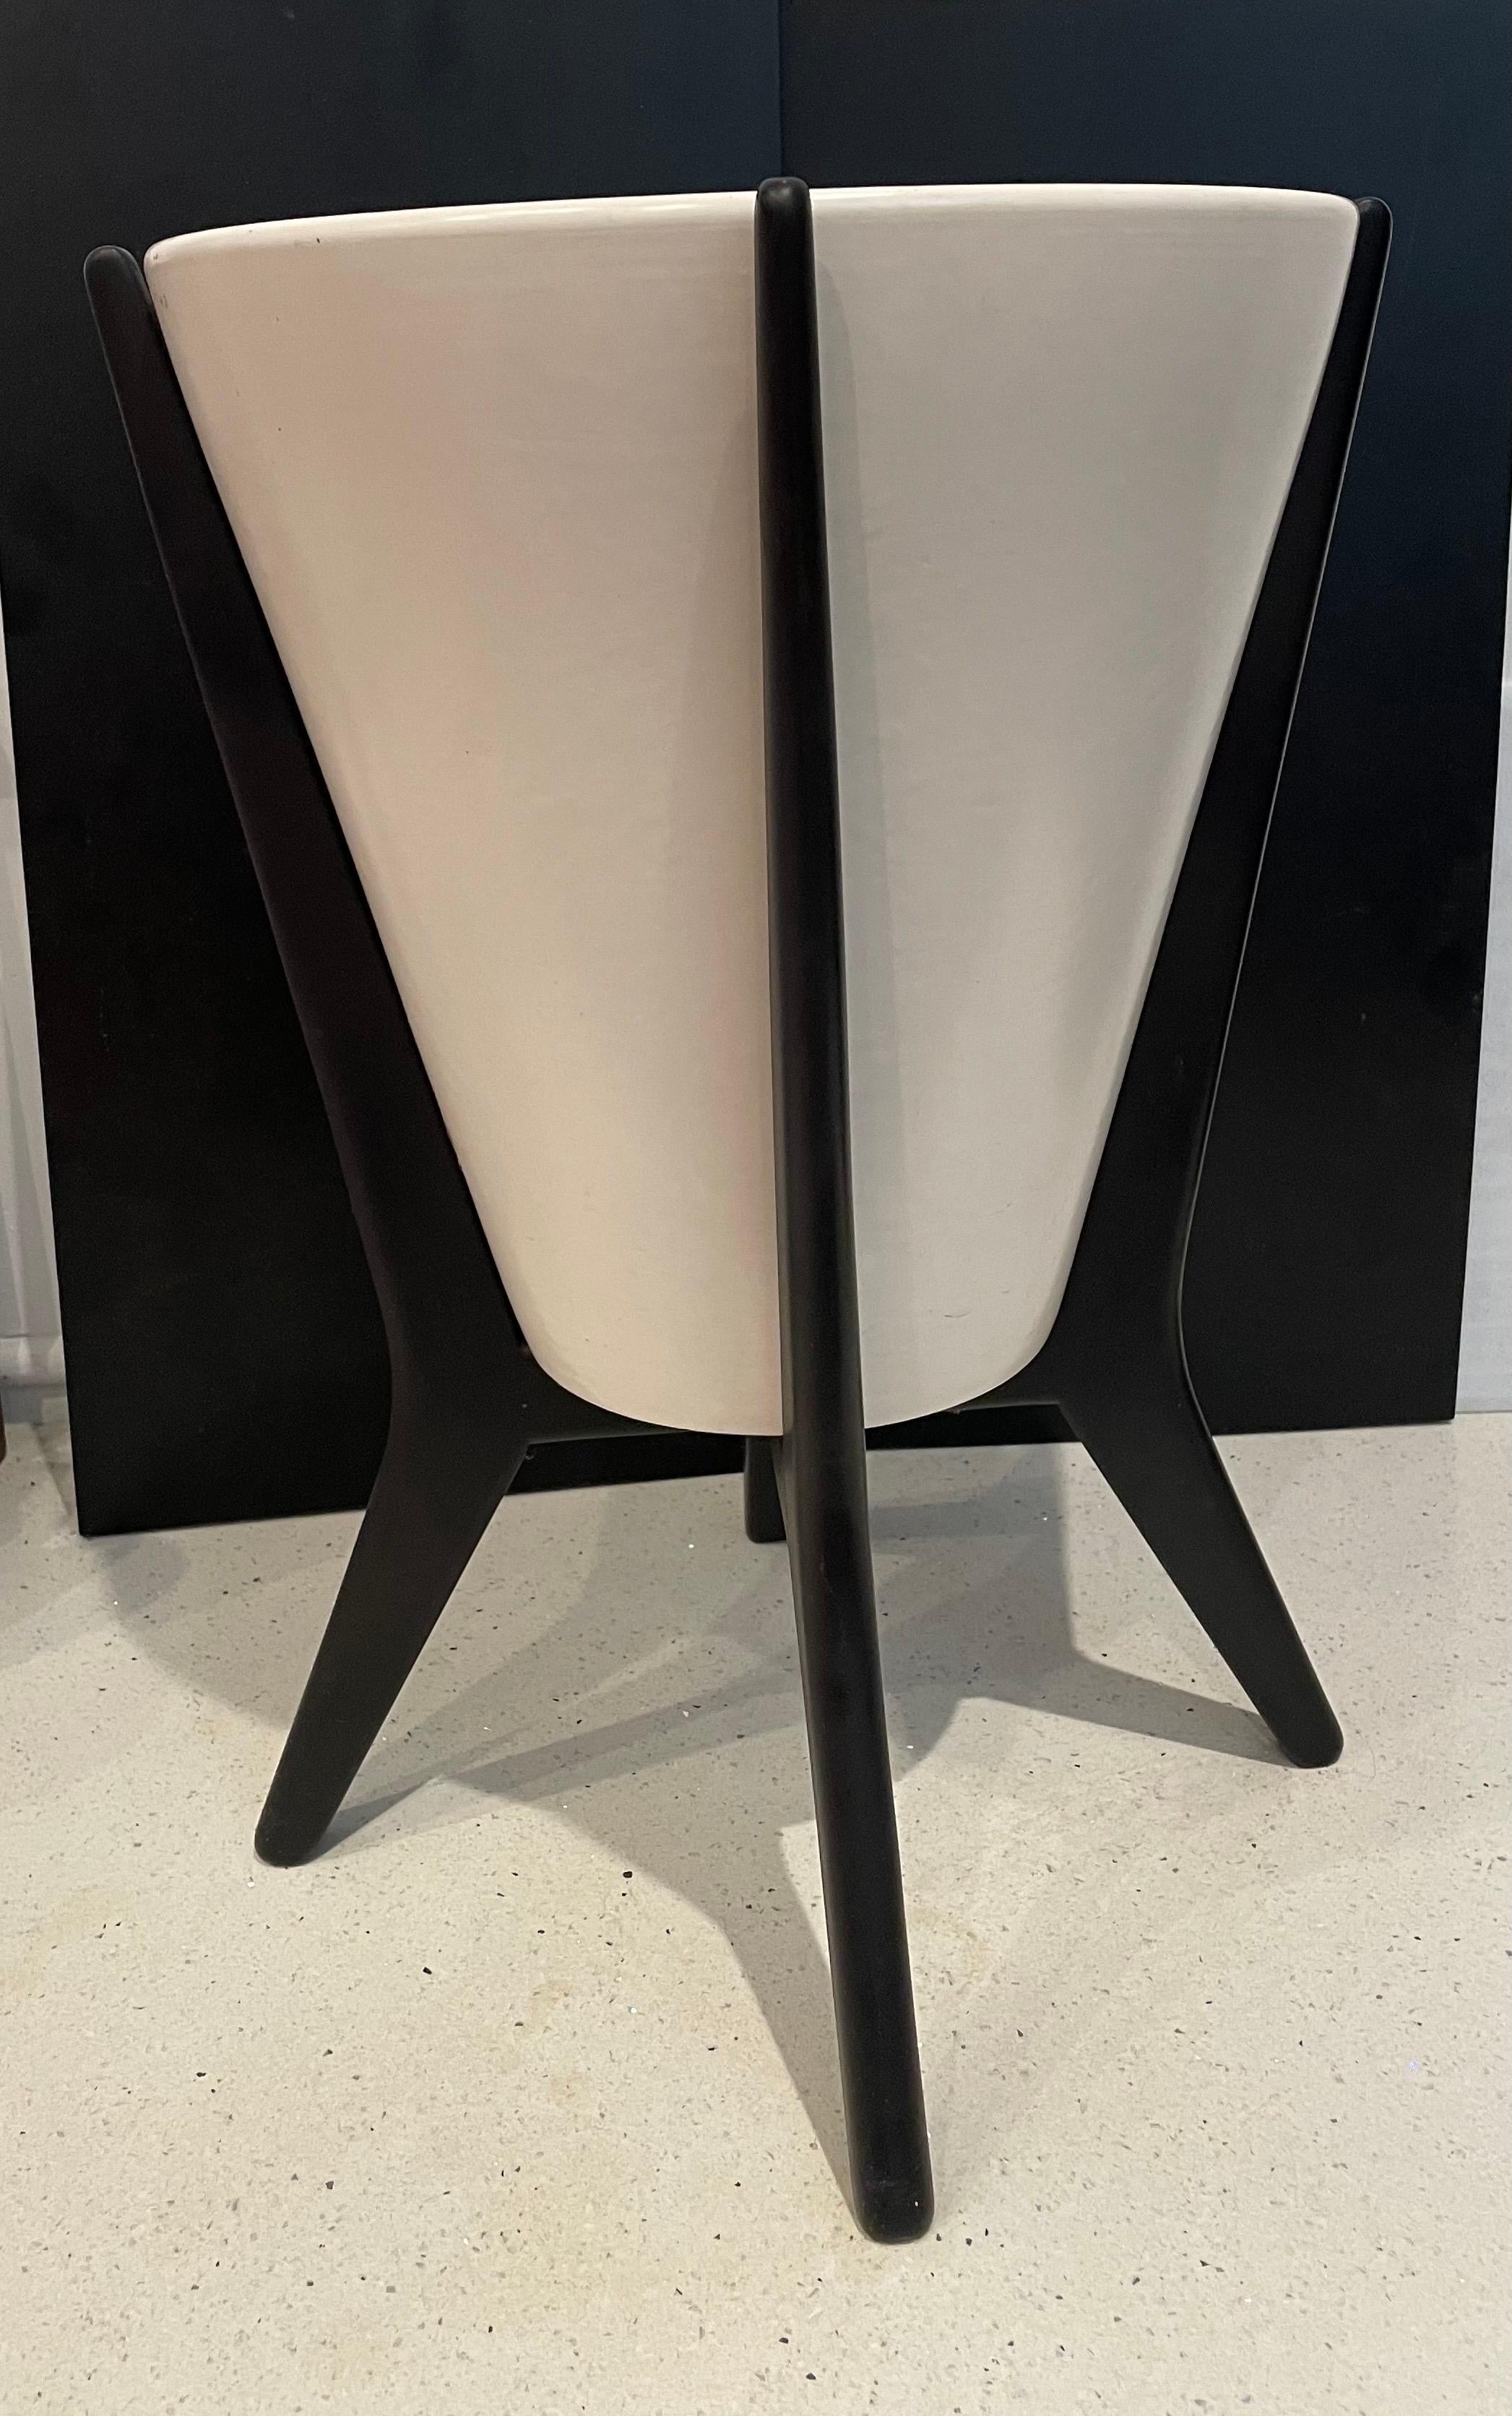 This unique American Mid-Century Modern, atomic age Architectural planter with black Laquer Adrian Pearsall style base, excellent condition no chips or cracks one of a kind piece.